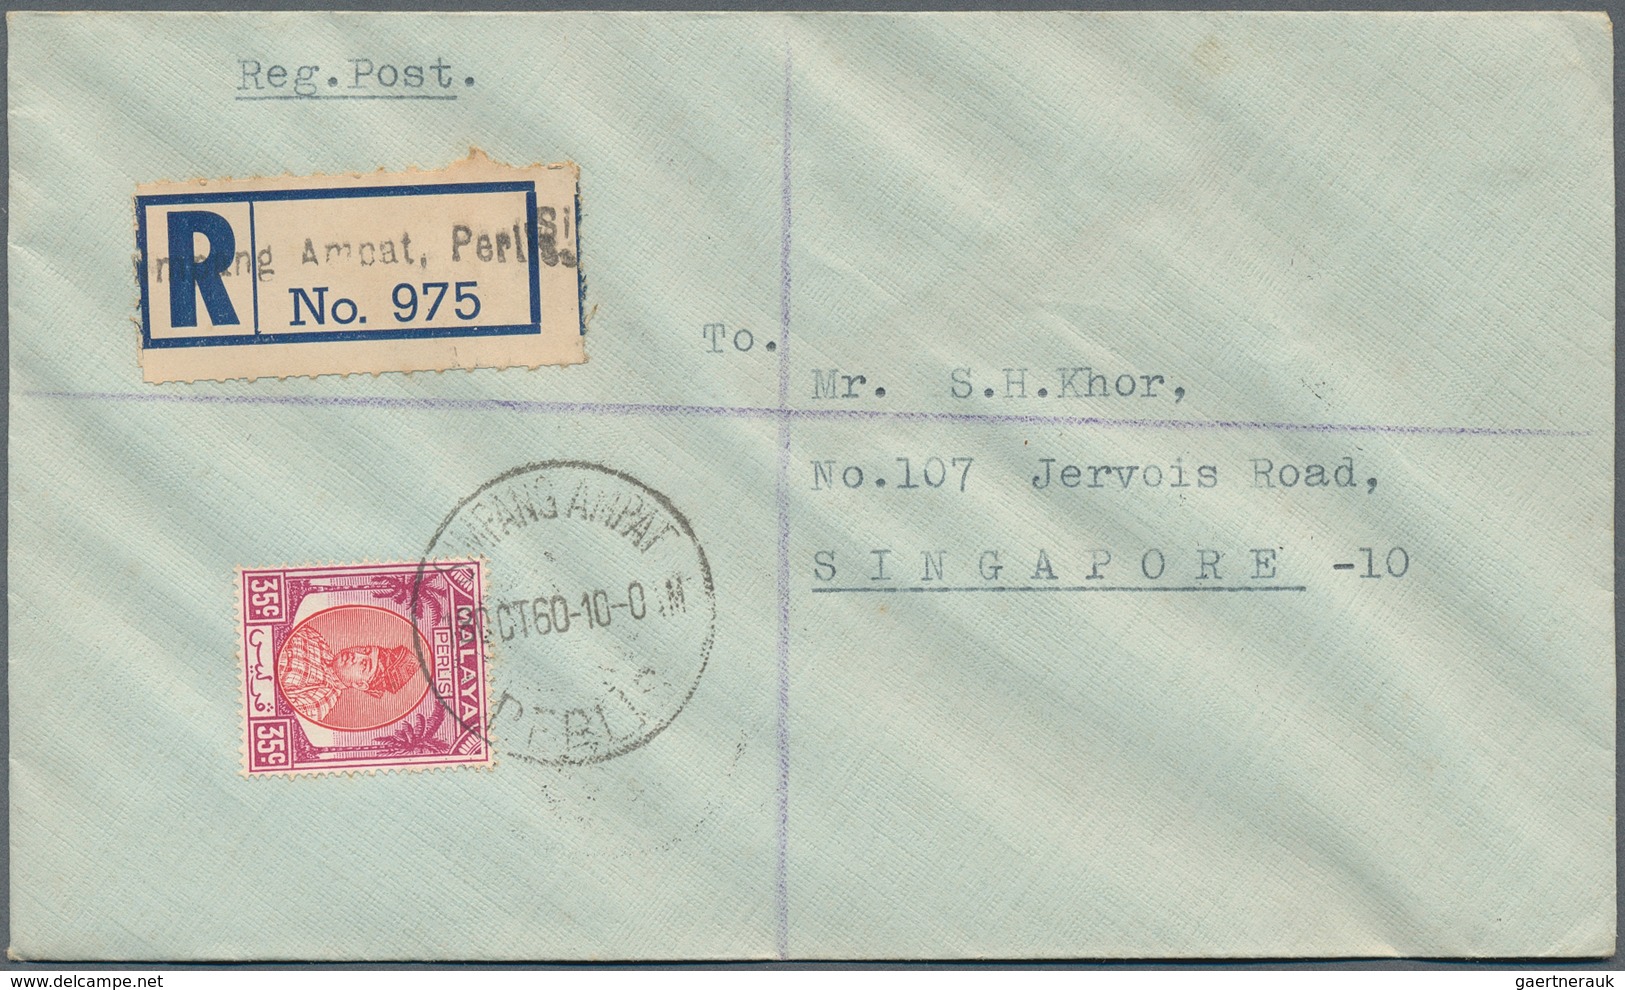 Malaiische Staaten - Perlis: 1950's-1970's: Group Of 26 Covers From Various Post Offices In Perlis, - Perlis